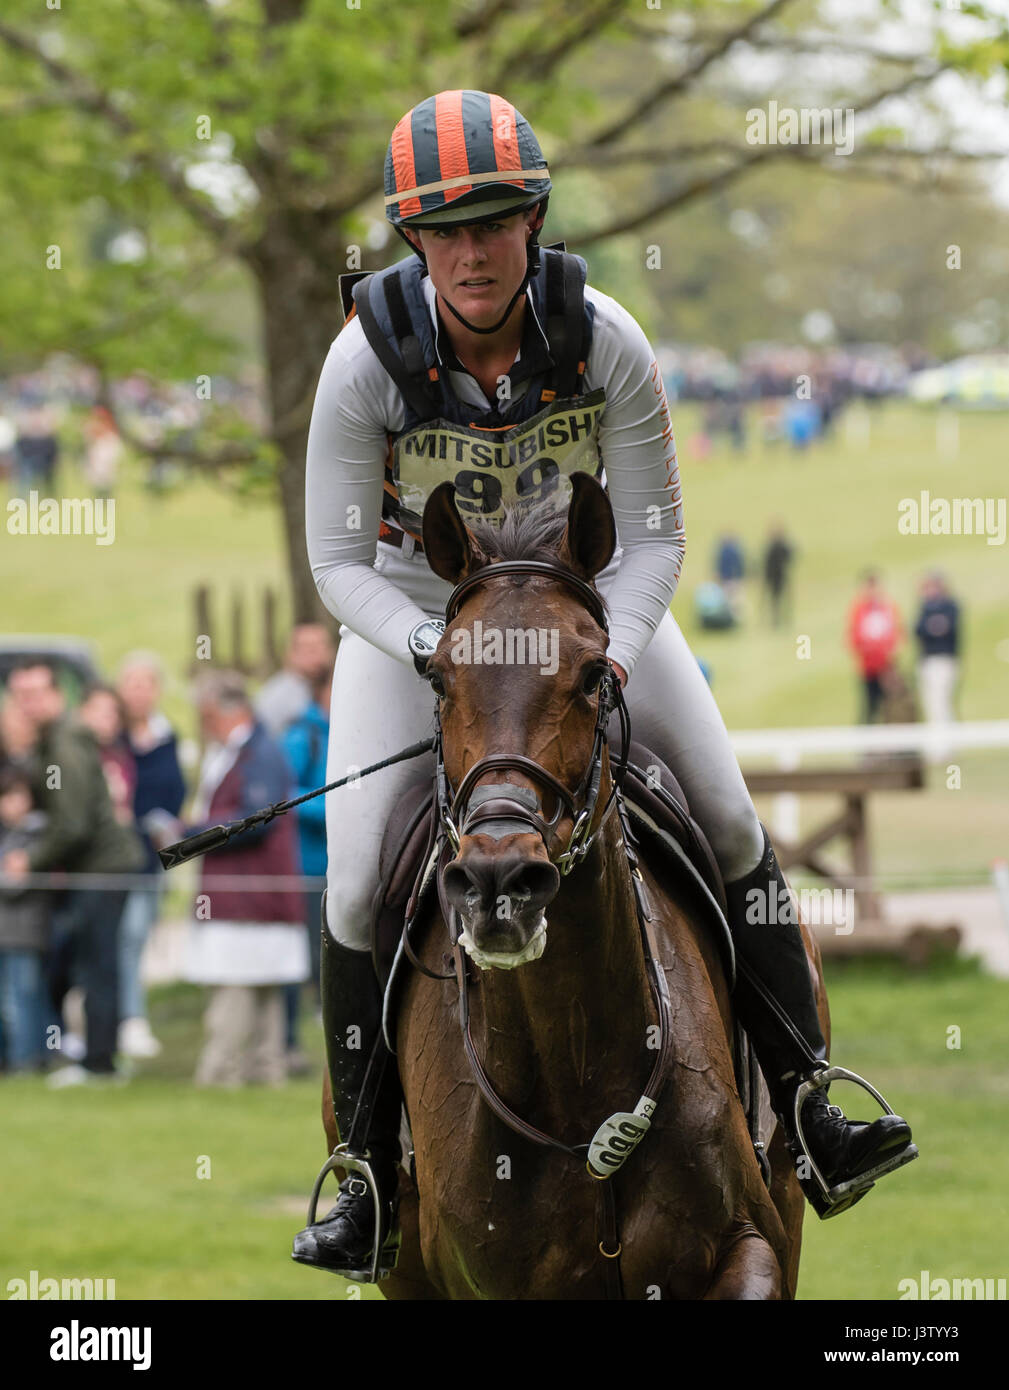 US rider Lauren Kieffer competing on Veronica at the Badminton Horse Trials 2017 Stock Photo